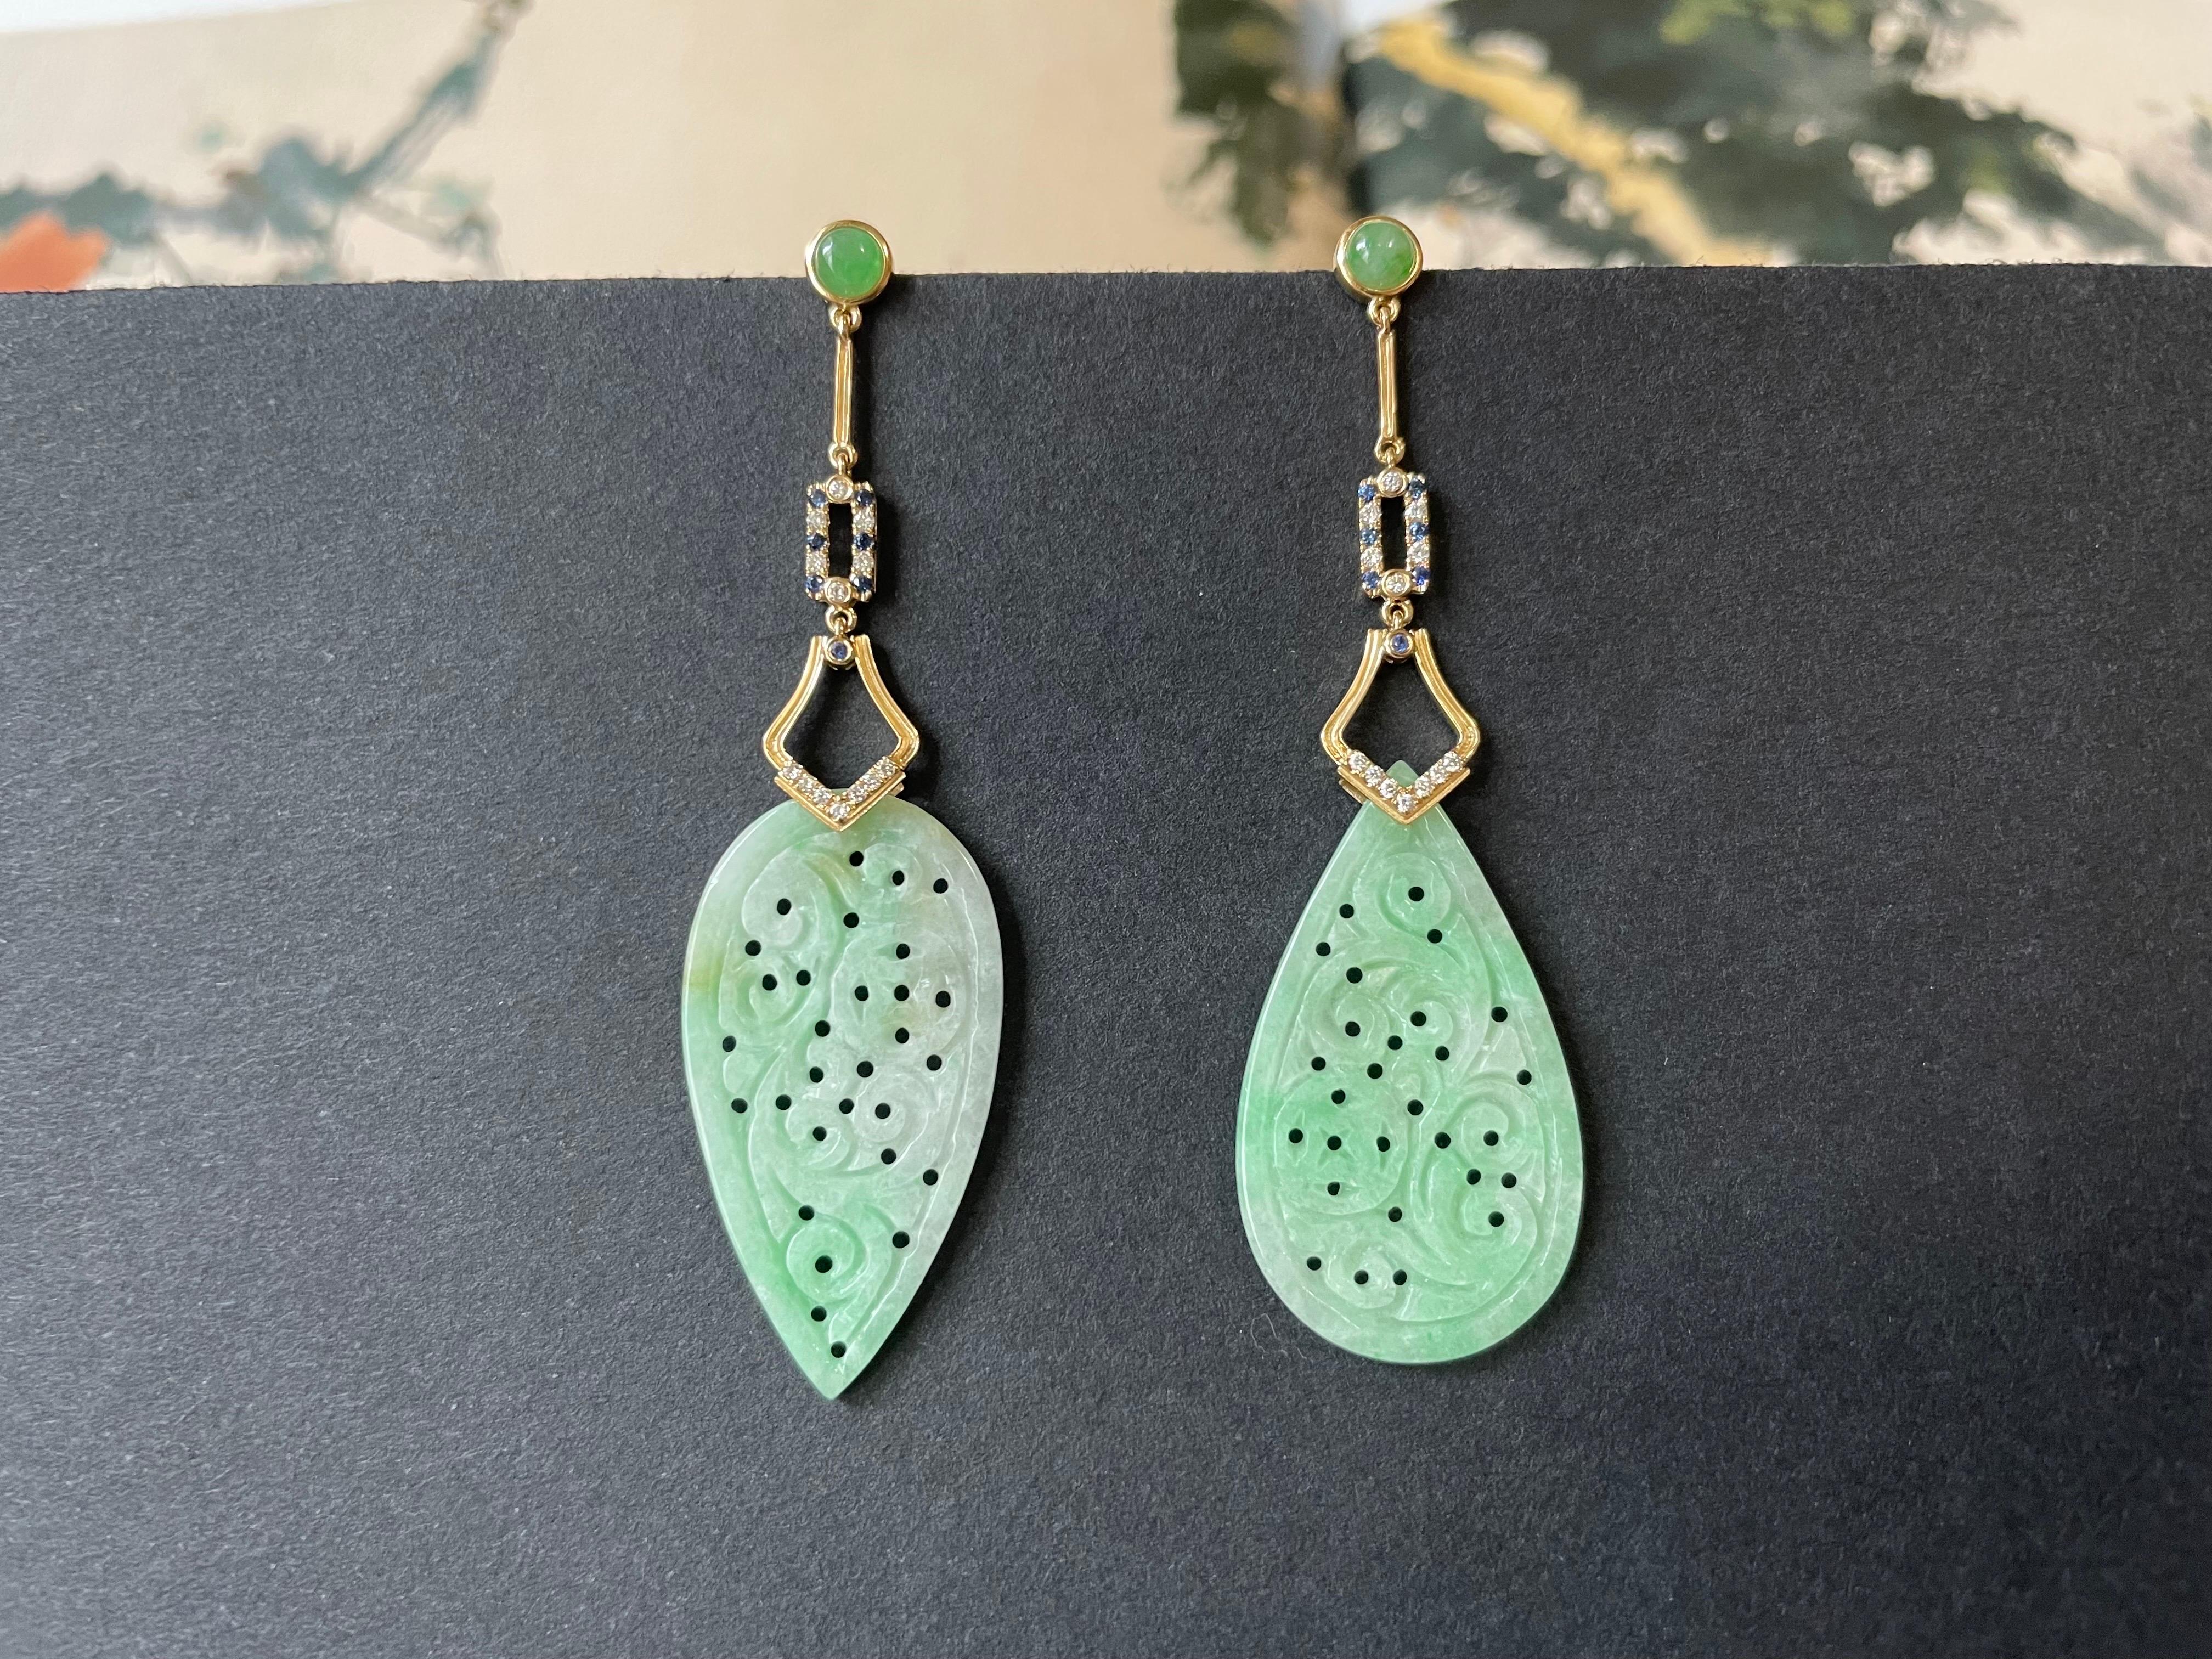 The custom-designed and handcrafted earrings are set with Myanmar apple green jadeite in an ancient carved drop shape pattern. These luxurious jadeite ear studs are framed in 18k gold embellished with vibrant blue sapphires, high-quality diamonds,